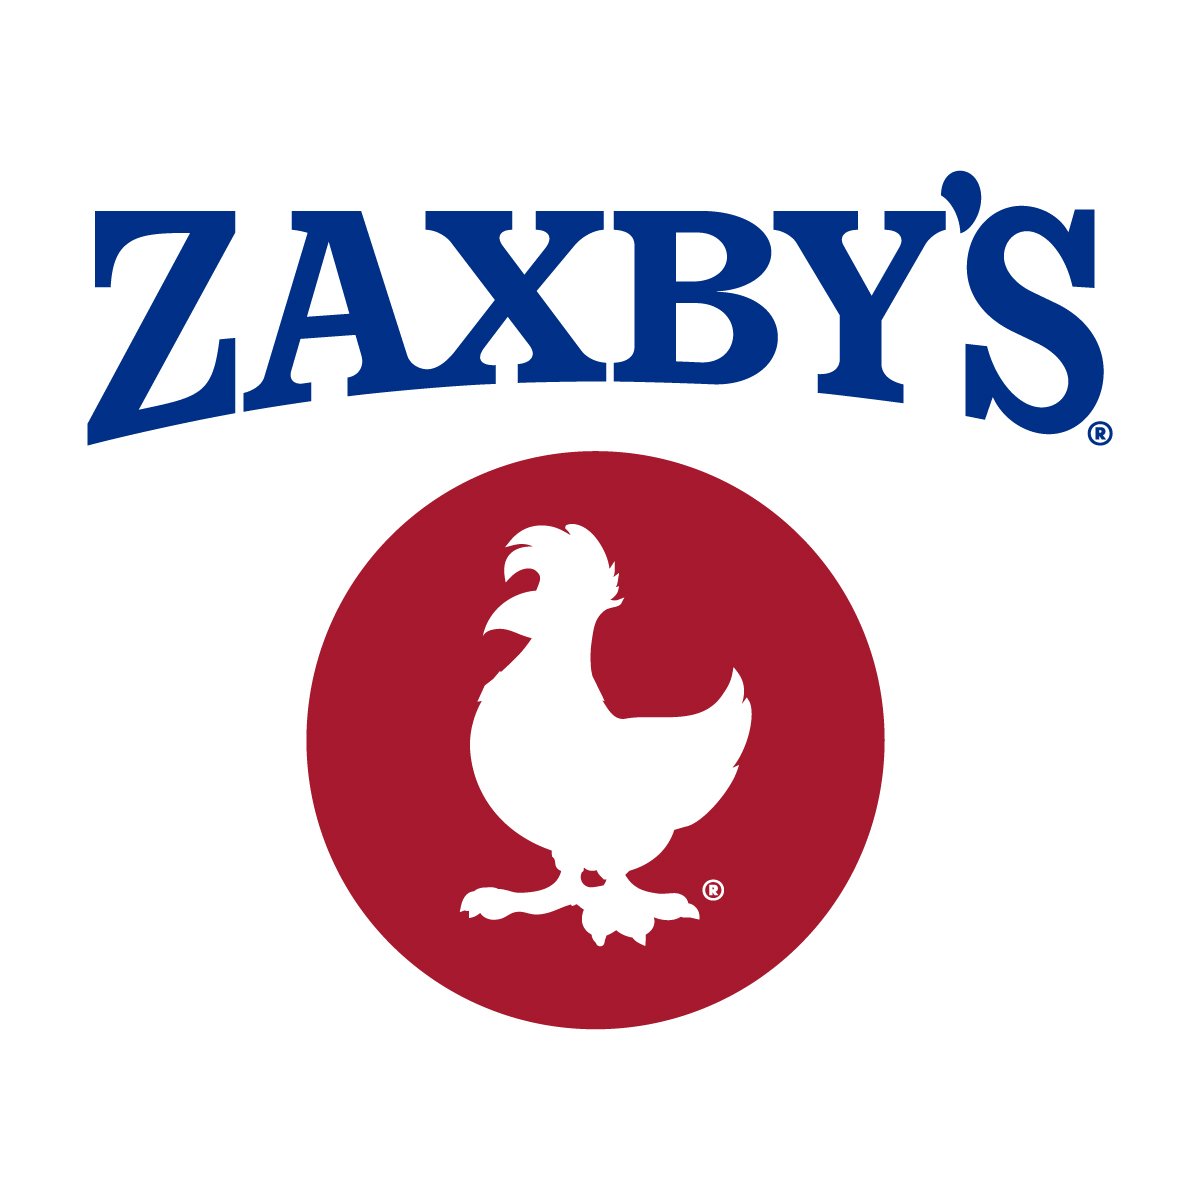 Zaxby's_Primary_RGB_full-color.jpg